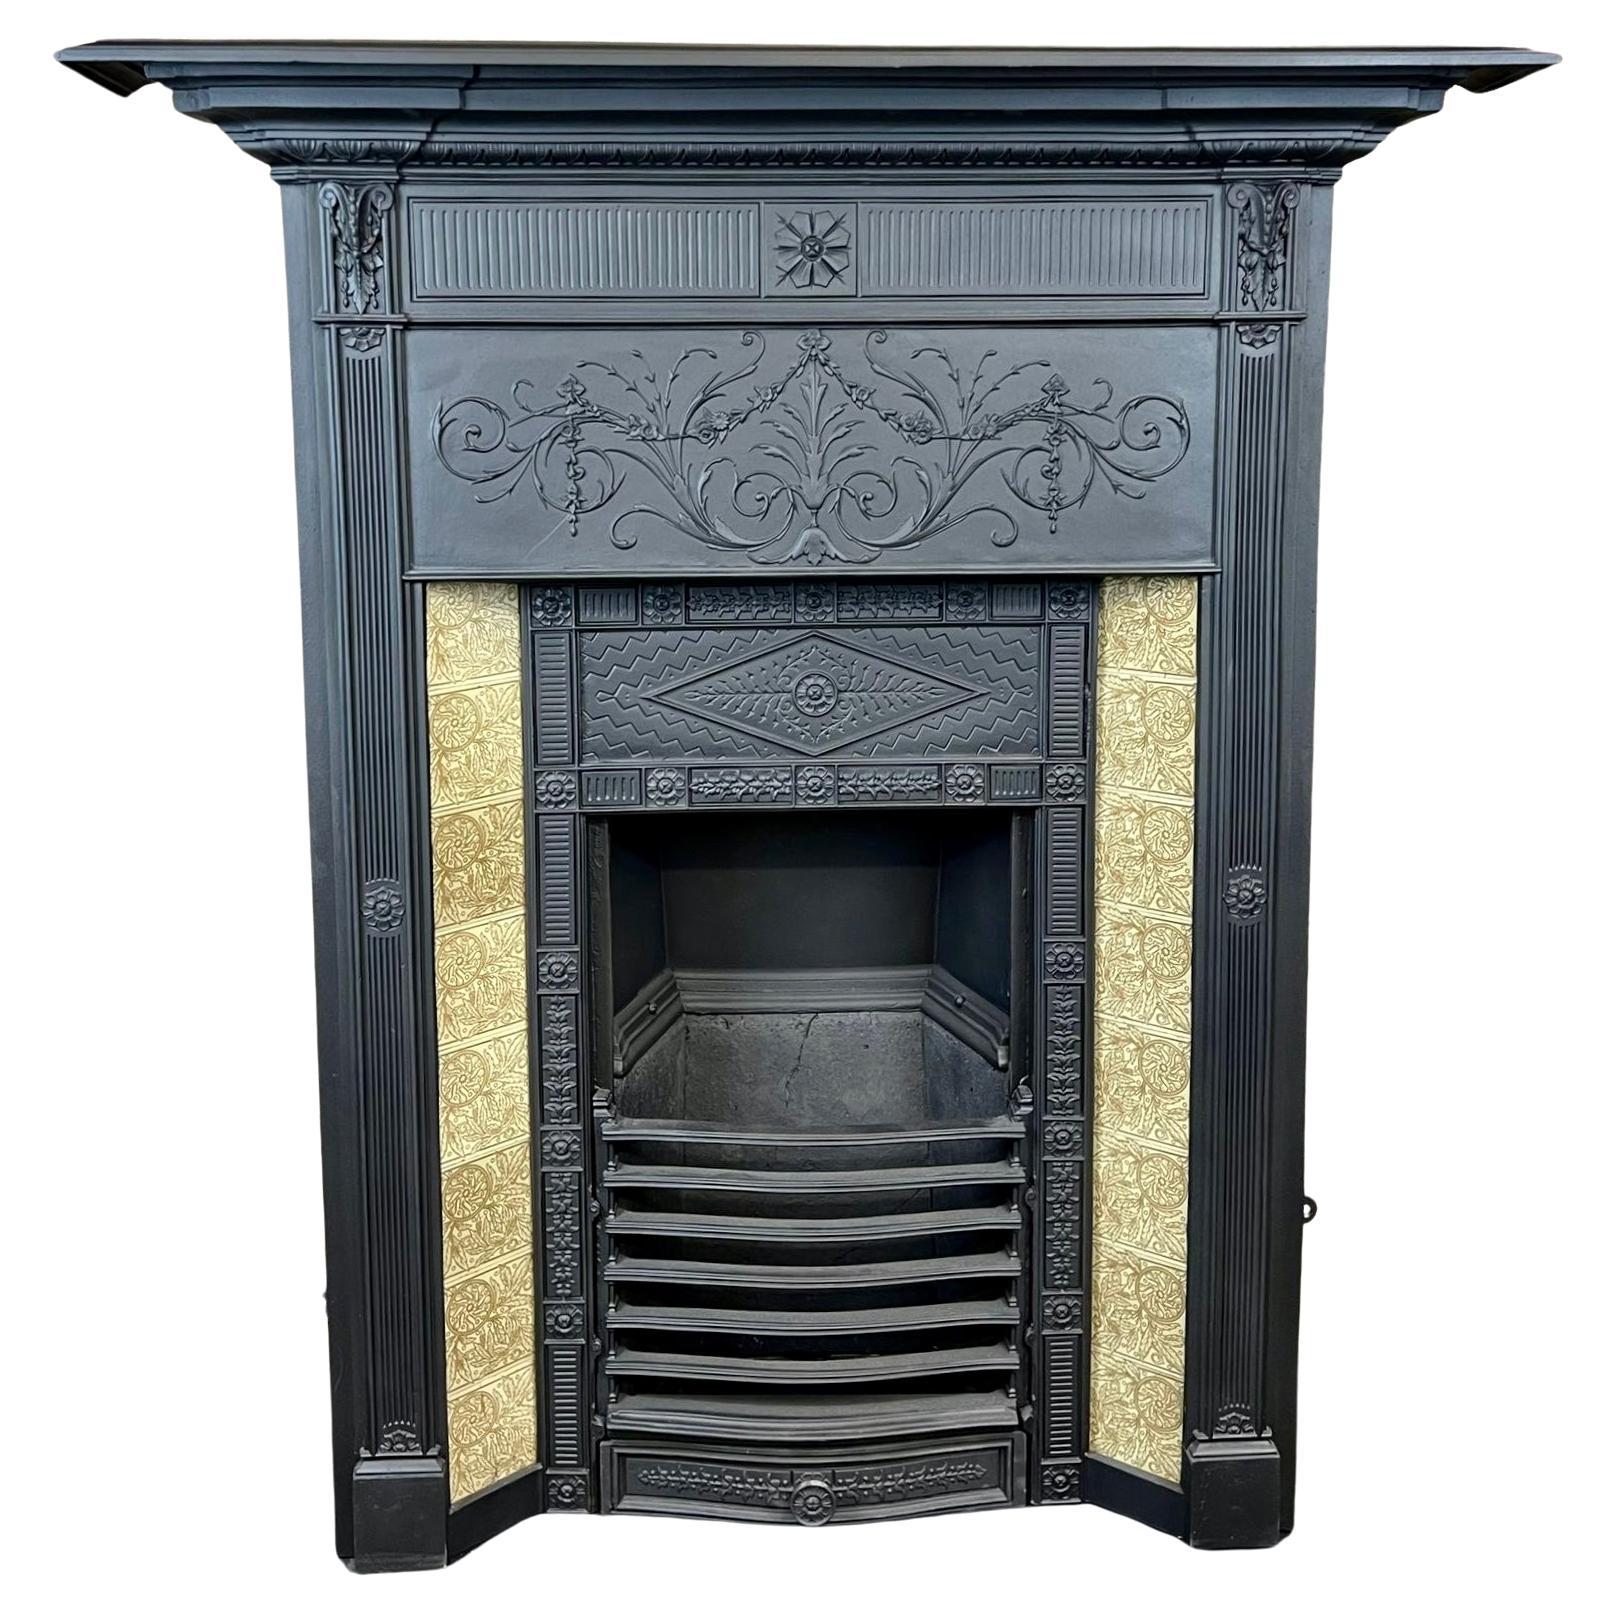 19th Century, Victorian Cast-iron Tiled Combination Fireplace